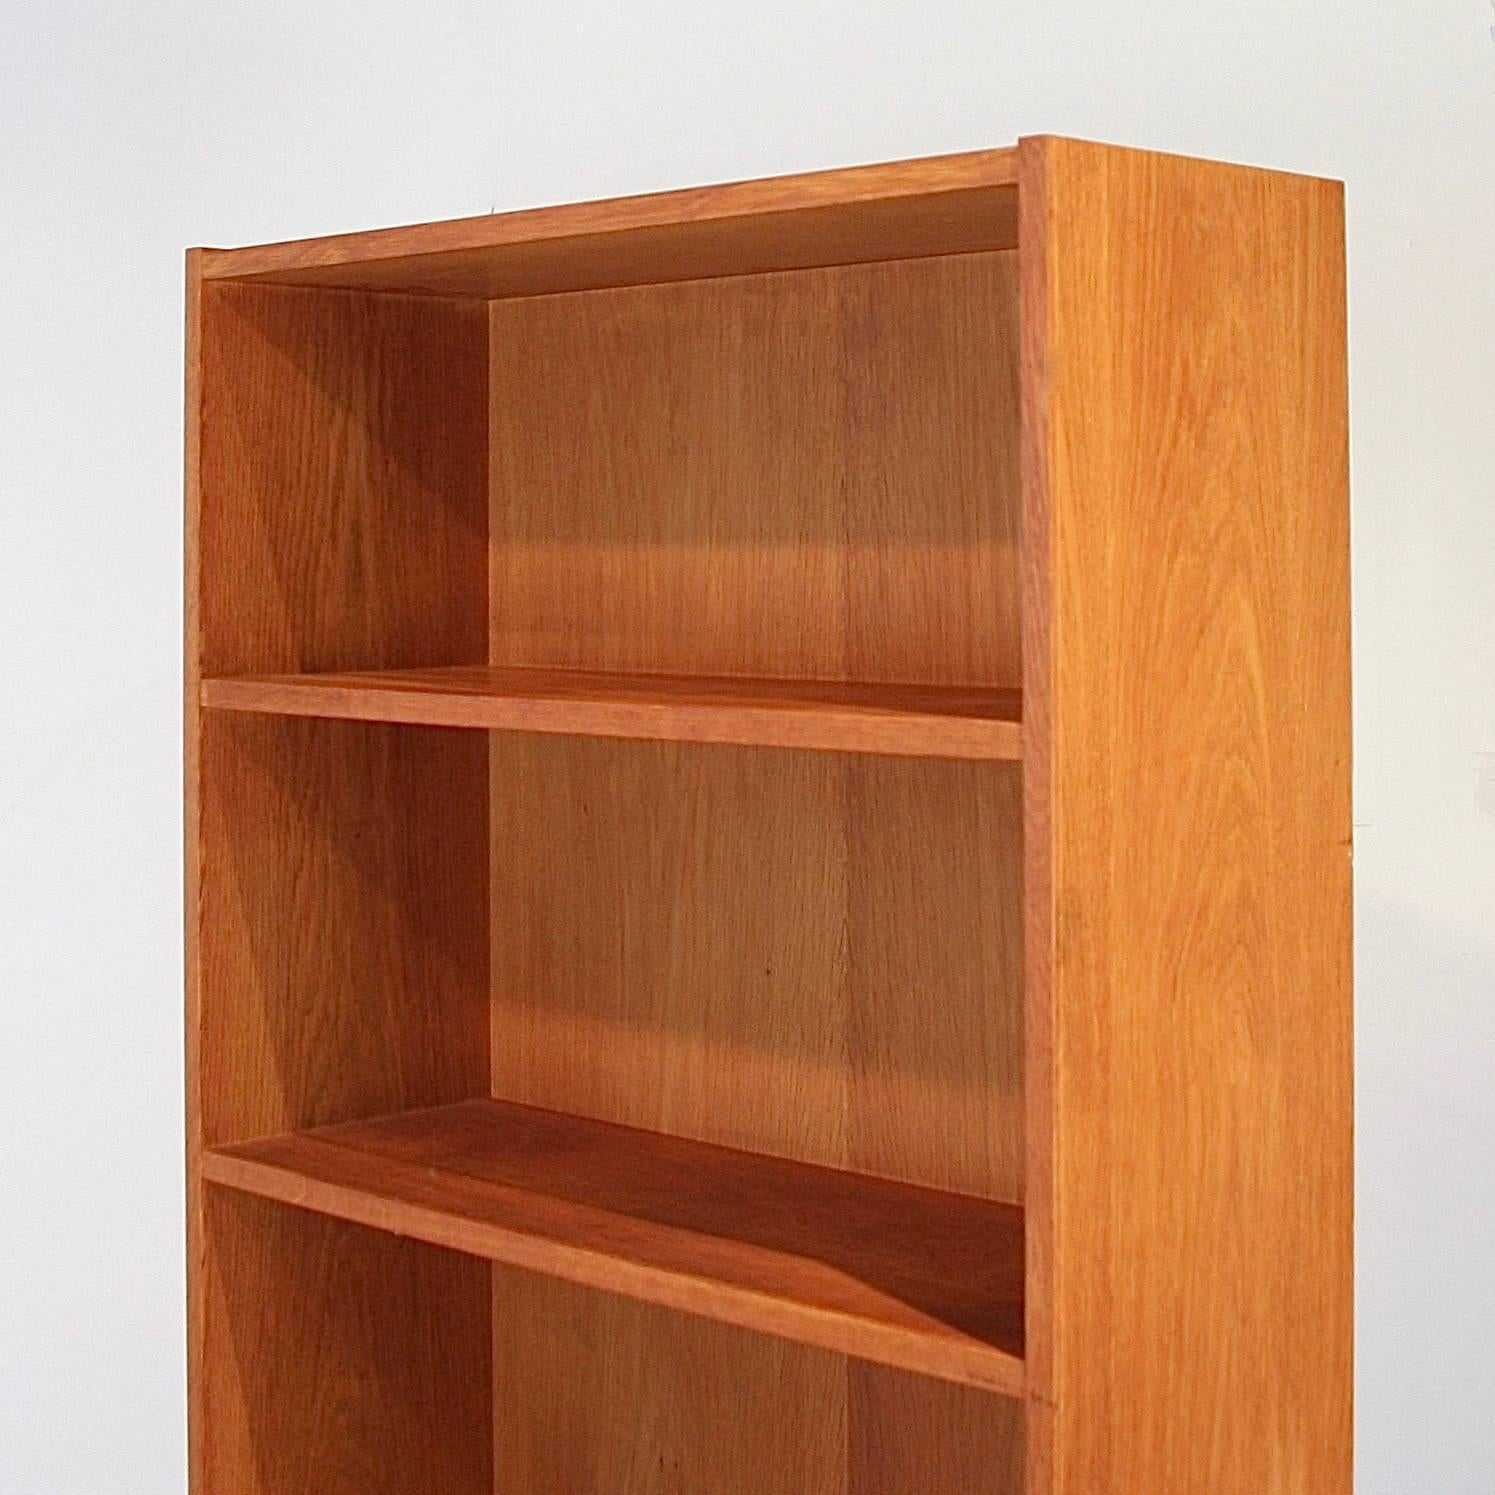 Vintage Danish oak bookcase with fixed shelves.  Made in Denmark.
 